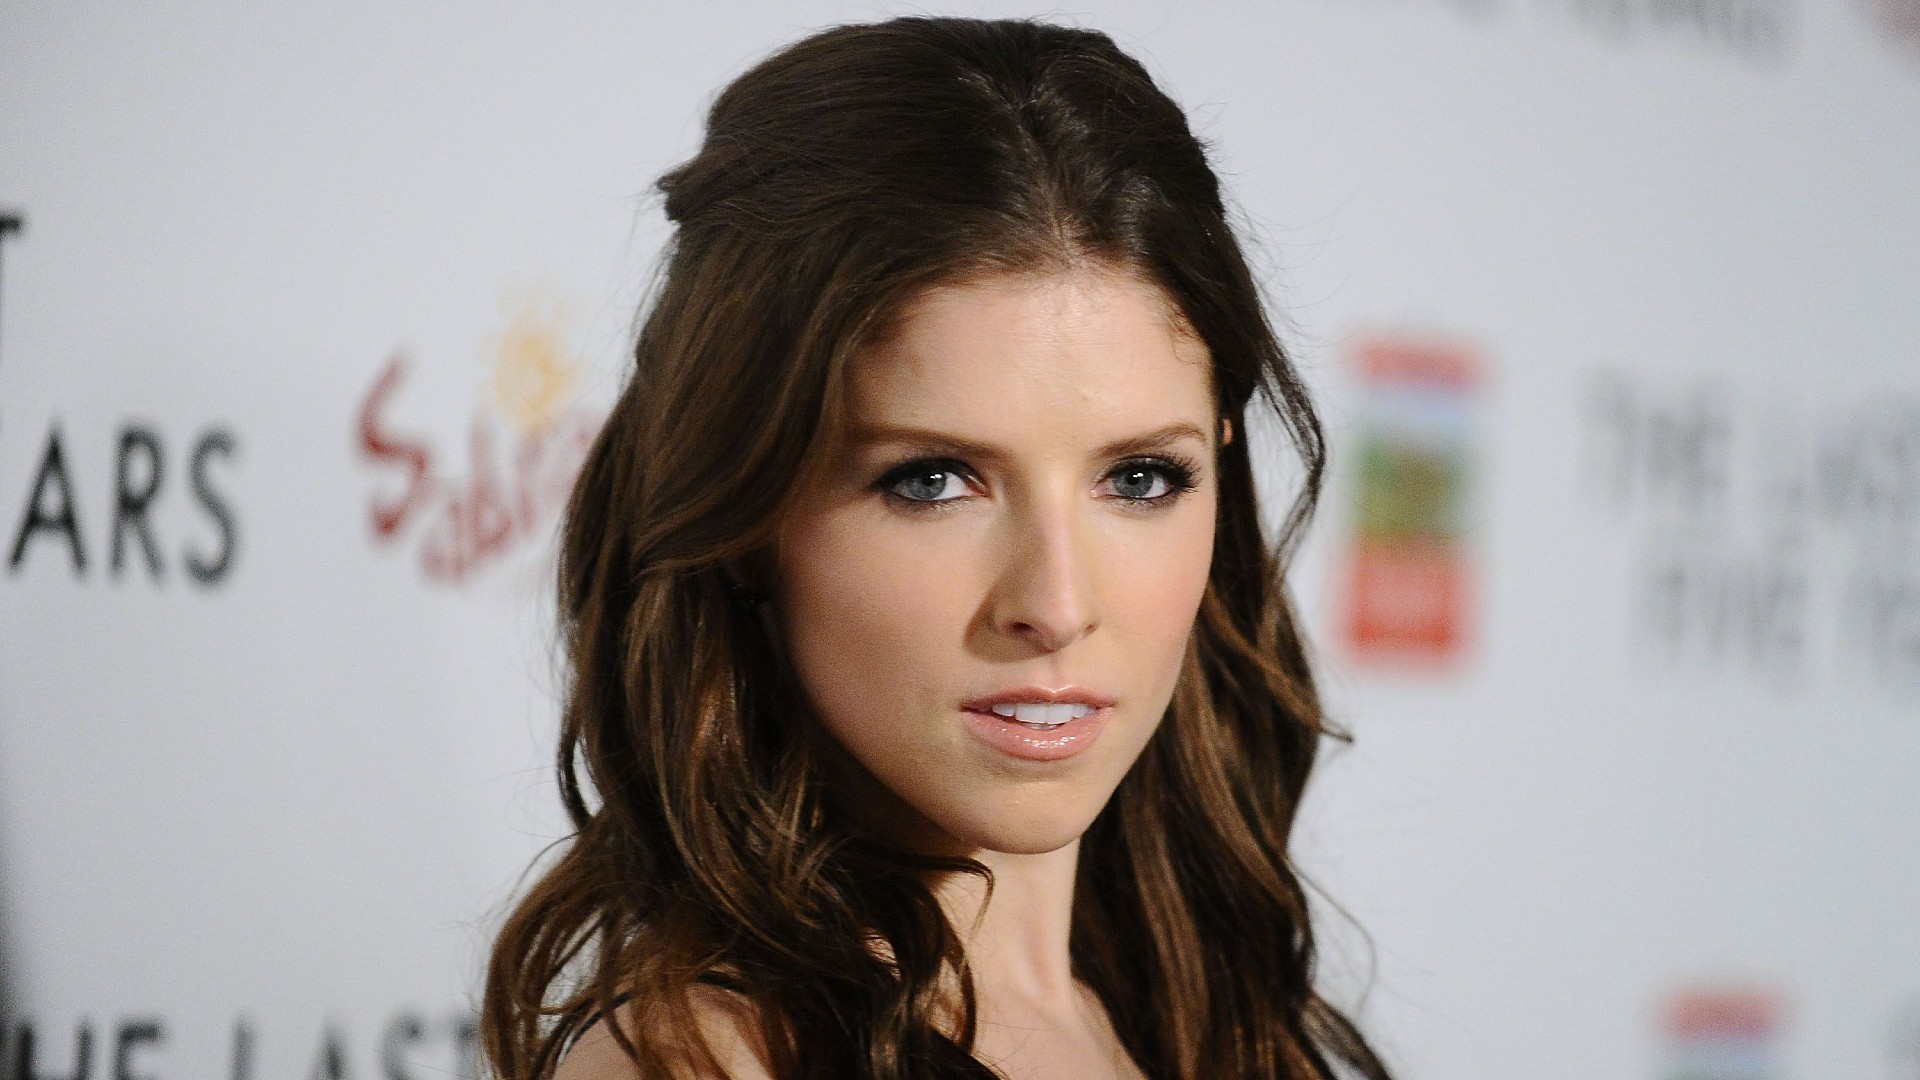 Anna Kendrick Pitch Perfect 2 Poster Meme #BossPitch | Marie Claire